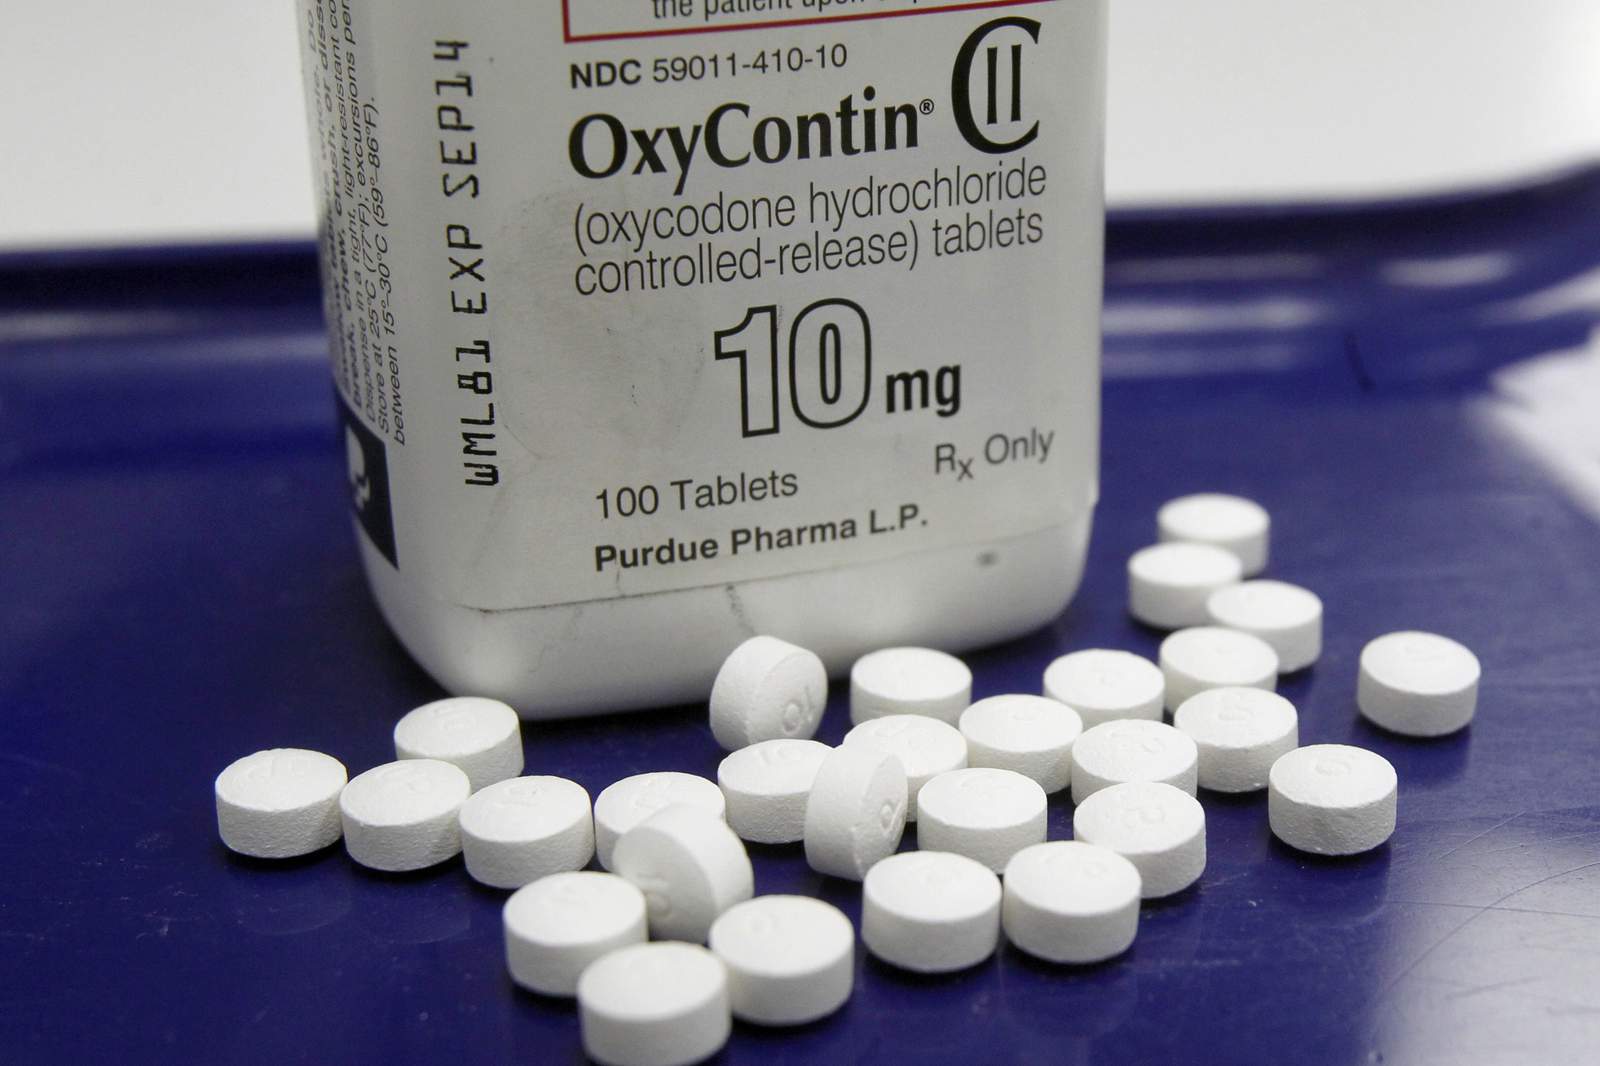 Experts: Revamped OxyContin hasn't curbed abuse, overdoses